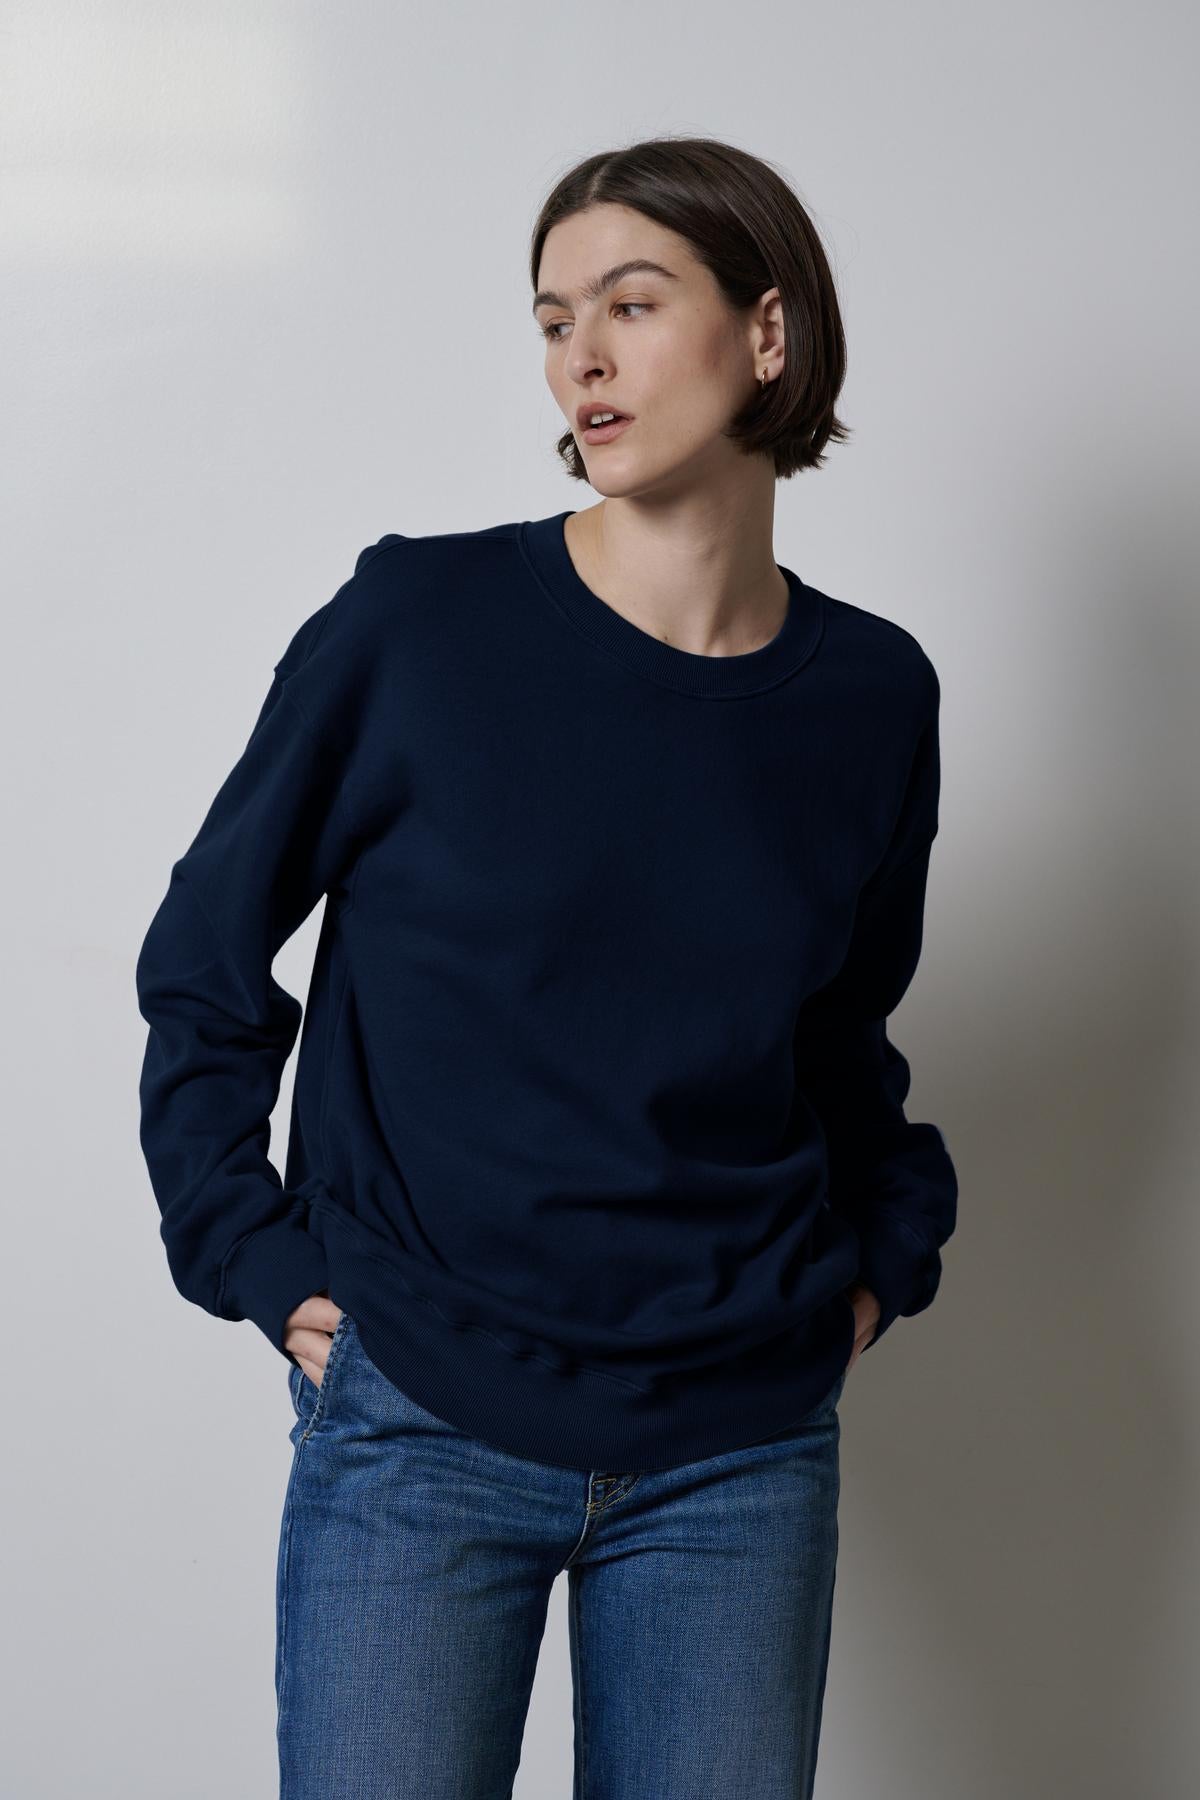   The model is wearing a Velvet by Jenny Graham Abbot sweatshirt, highlighting its styling versatility. 